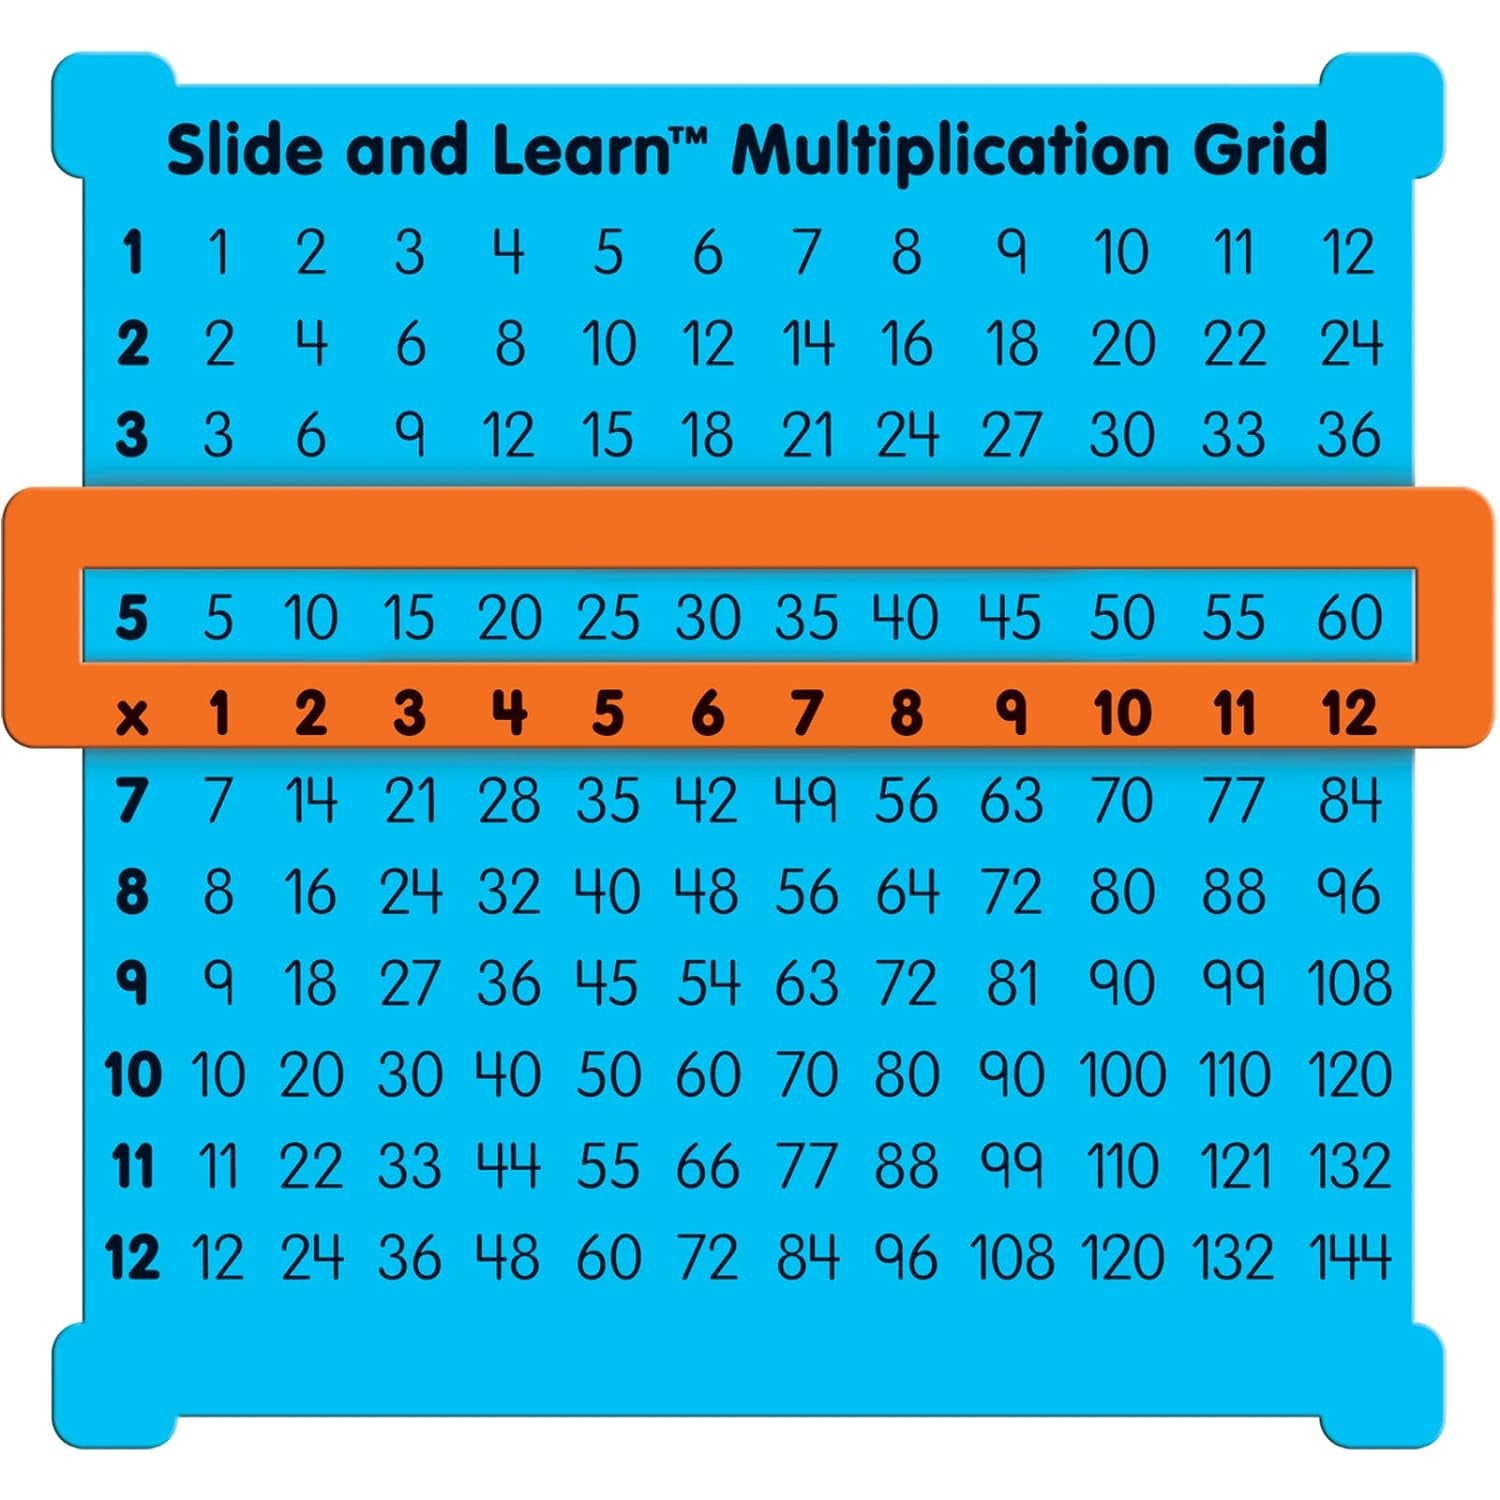 Slide and Learn Multiplication Grids, 5?” by 5½” (Set of 12) – Thin Plastic Multiplication Grid with Viewer Window – Help with Multiplication Problems and Practice Tracking at School